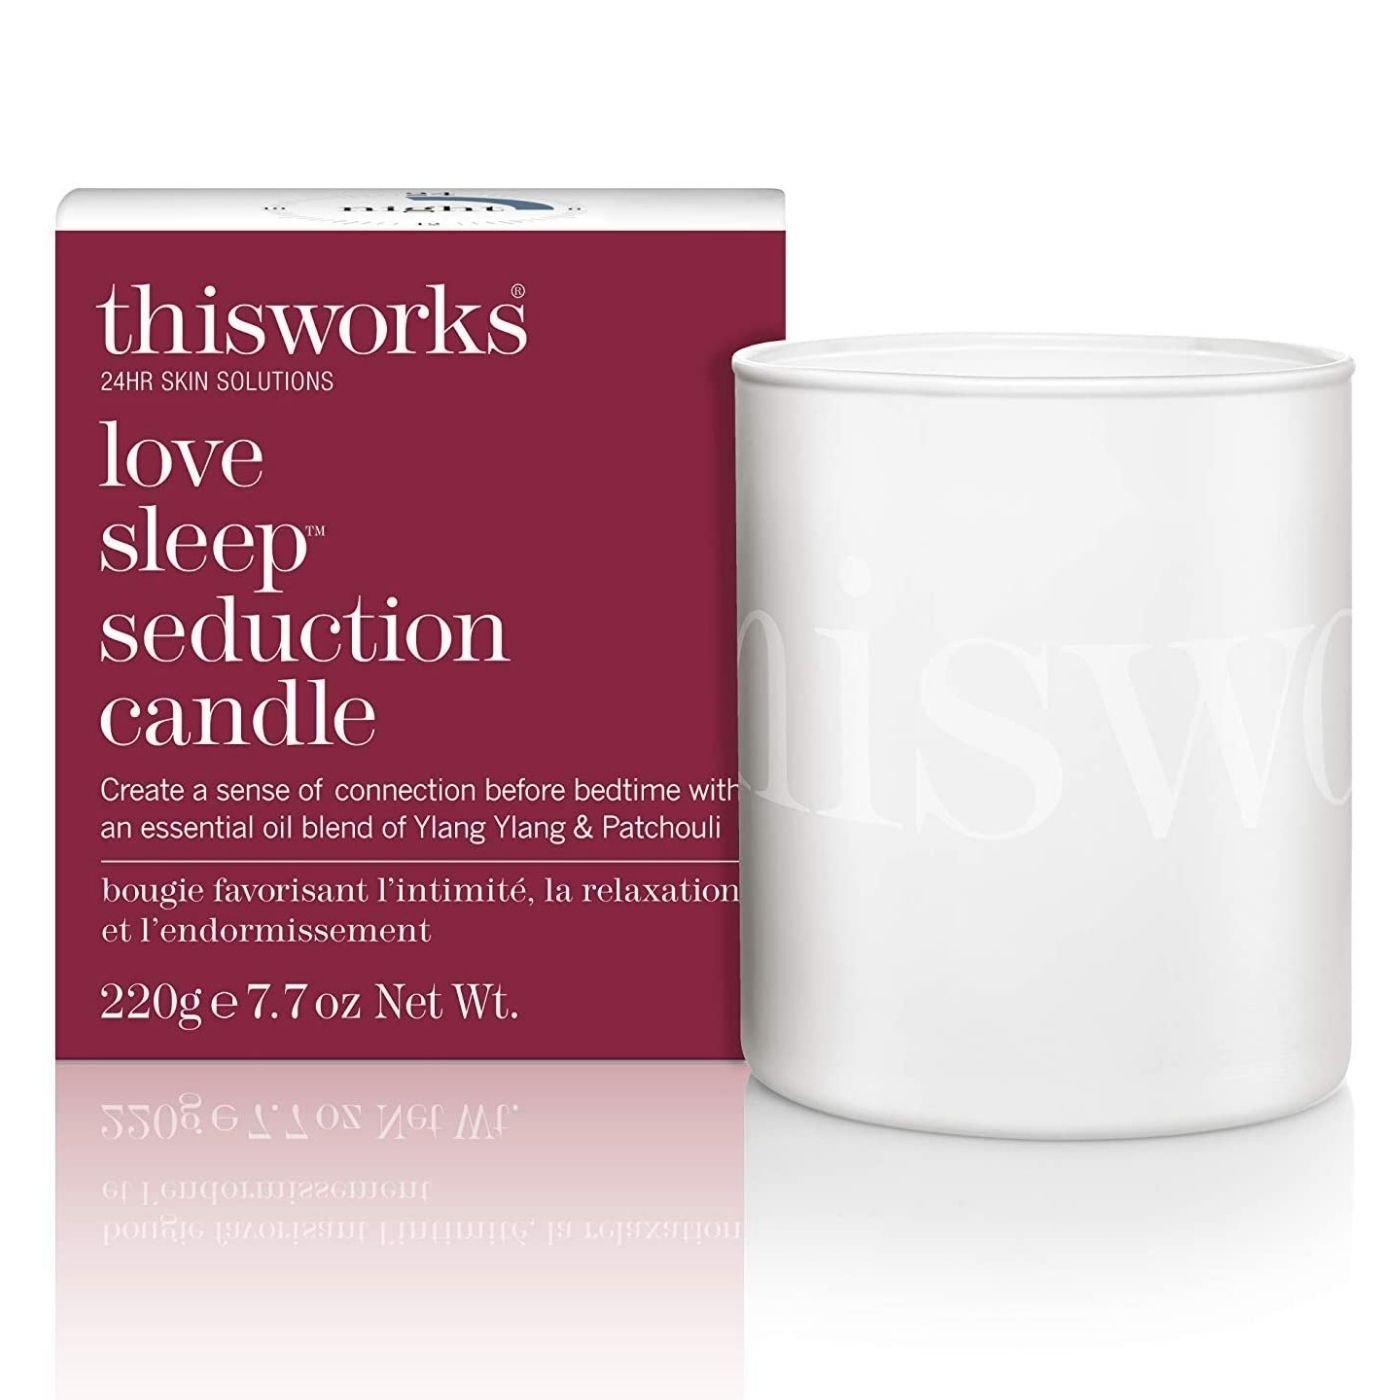 This Works this works | Love Sleep Seduction Candle - SkinShop